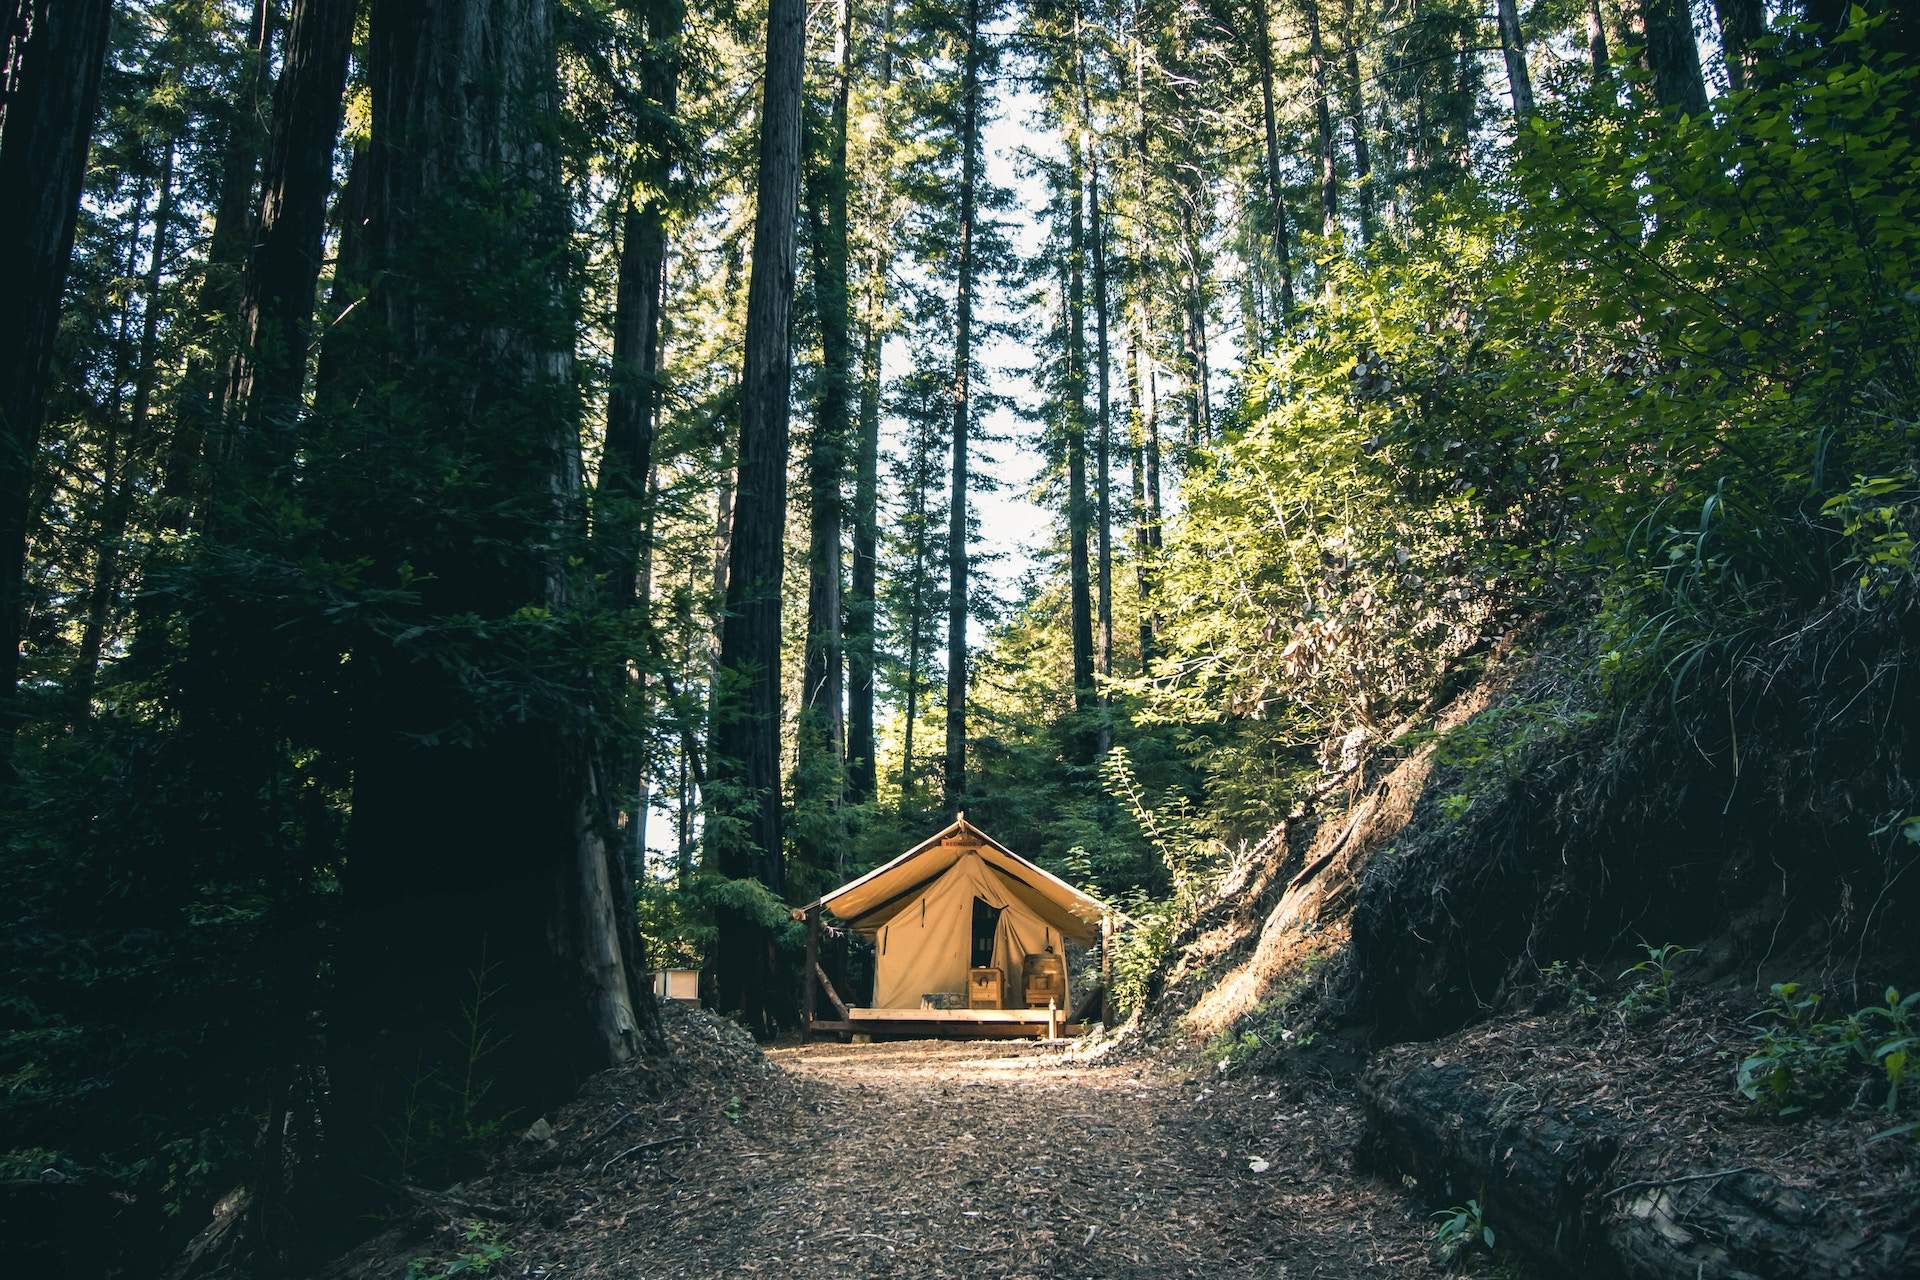 Outdoorsy’s Guide to Glamping